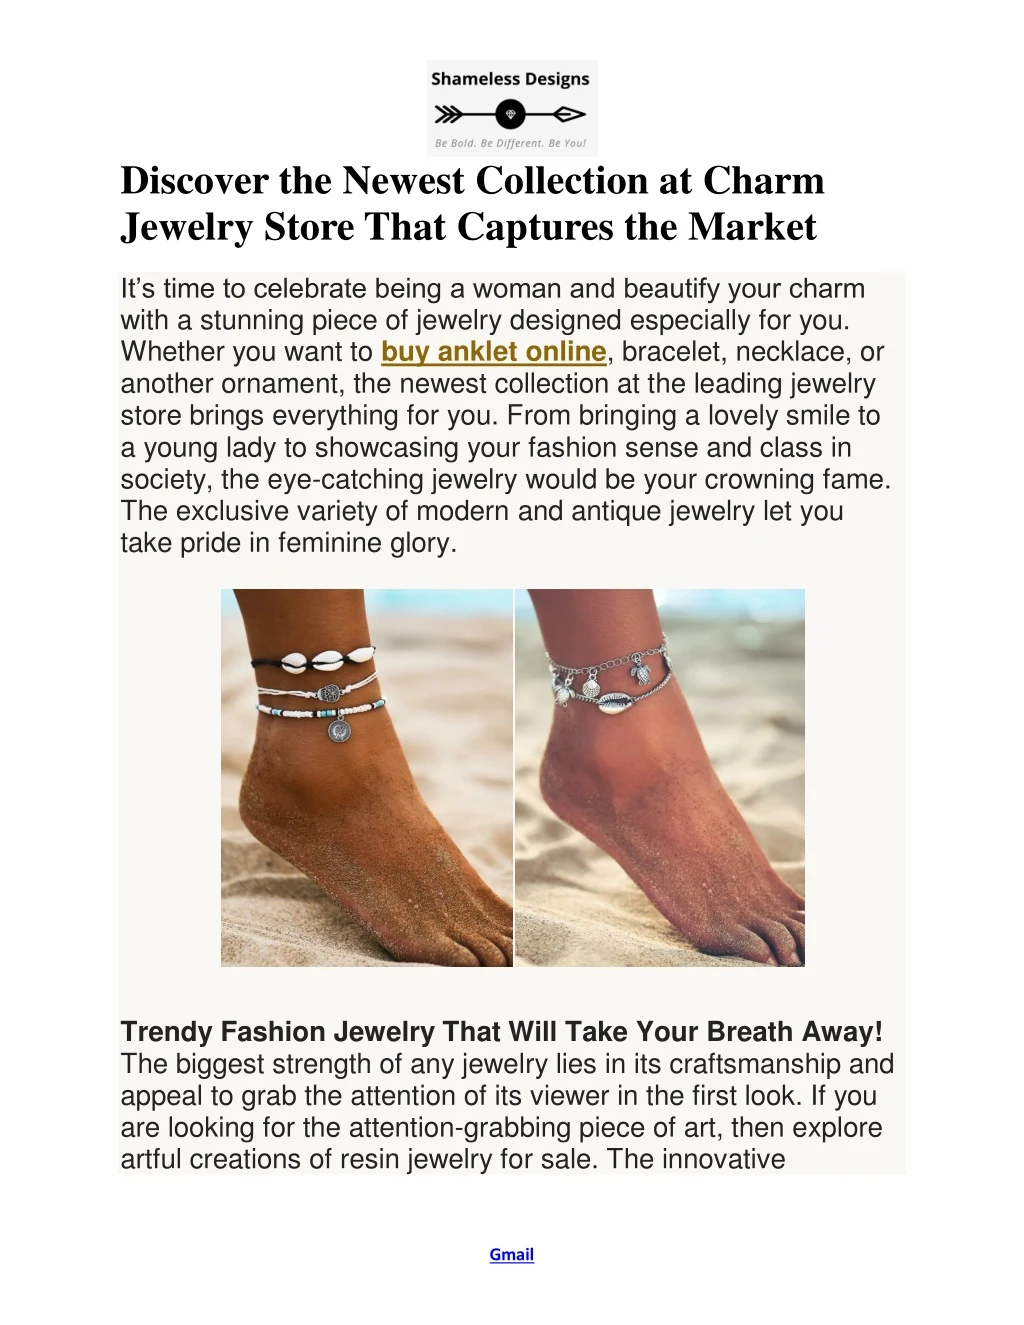 discover the newest collection at charm jewelry